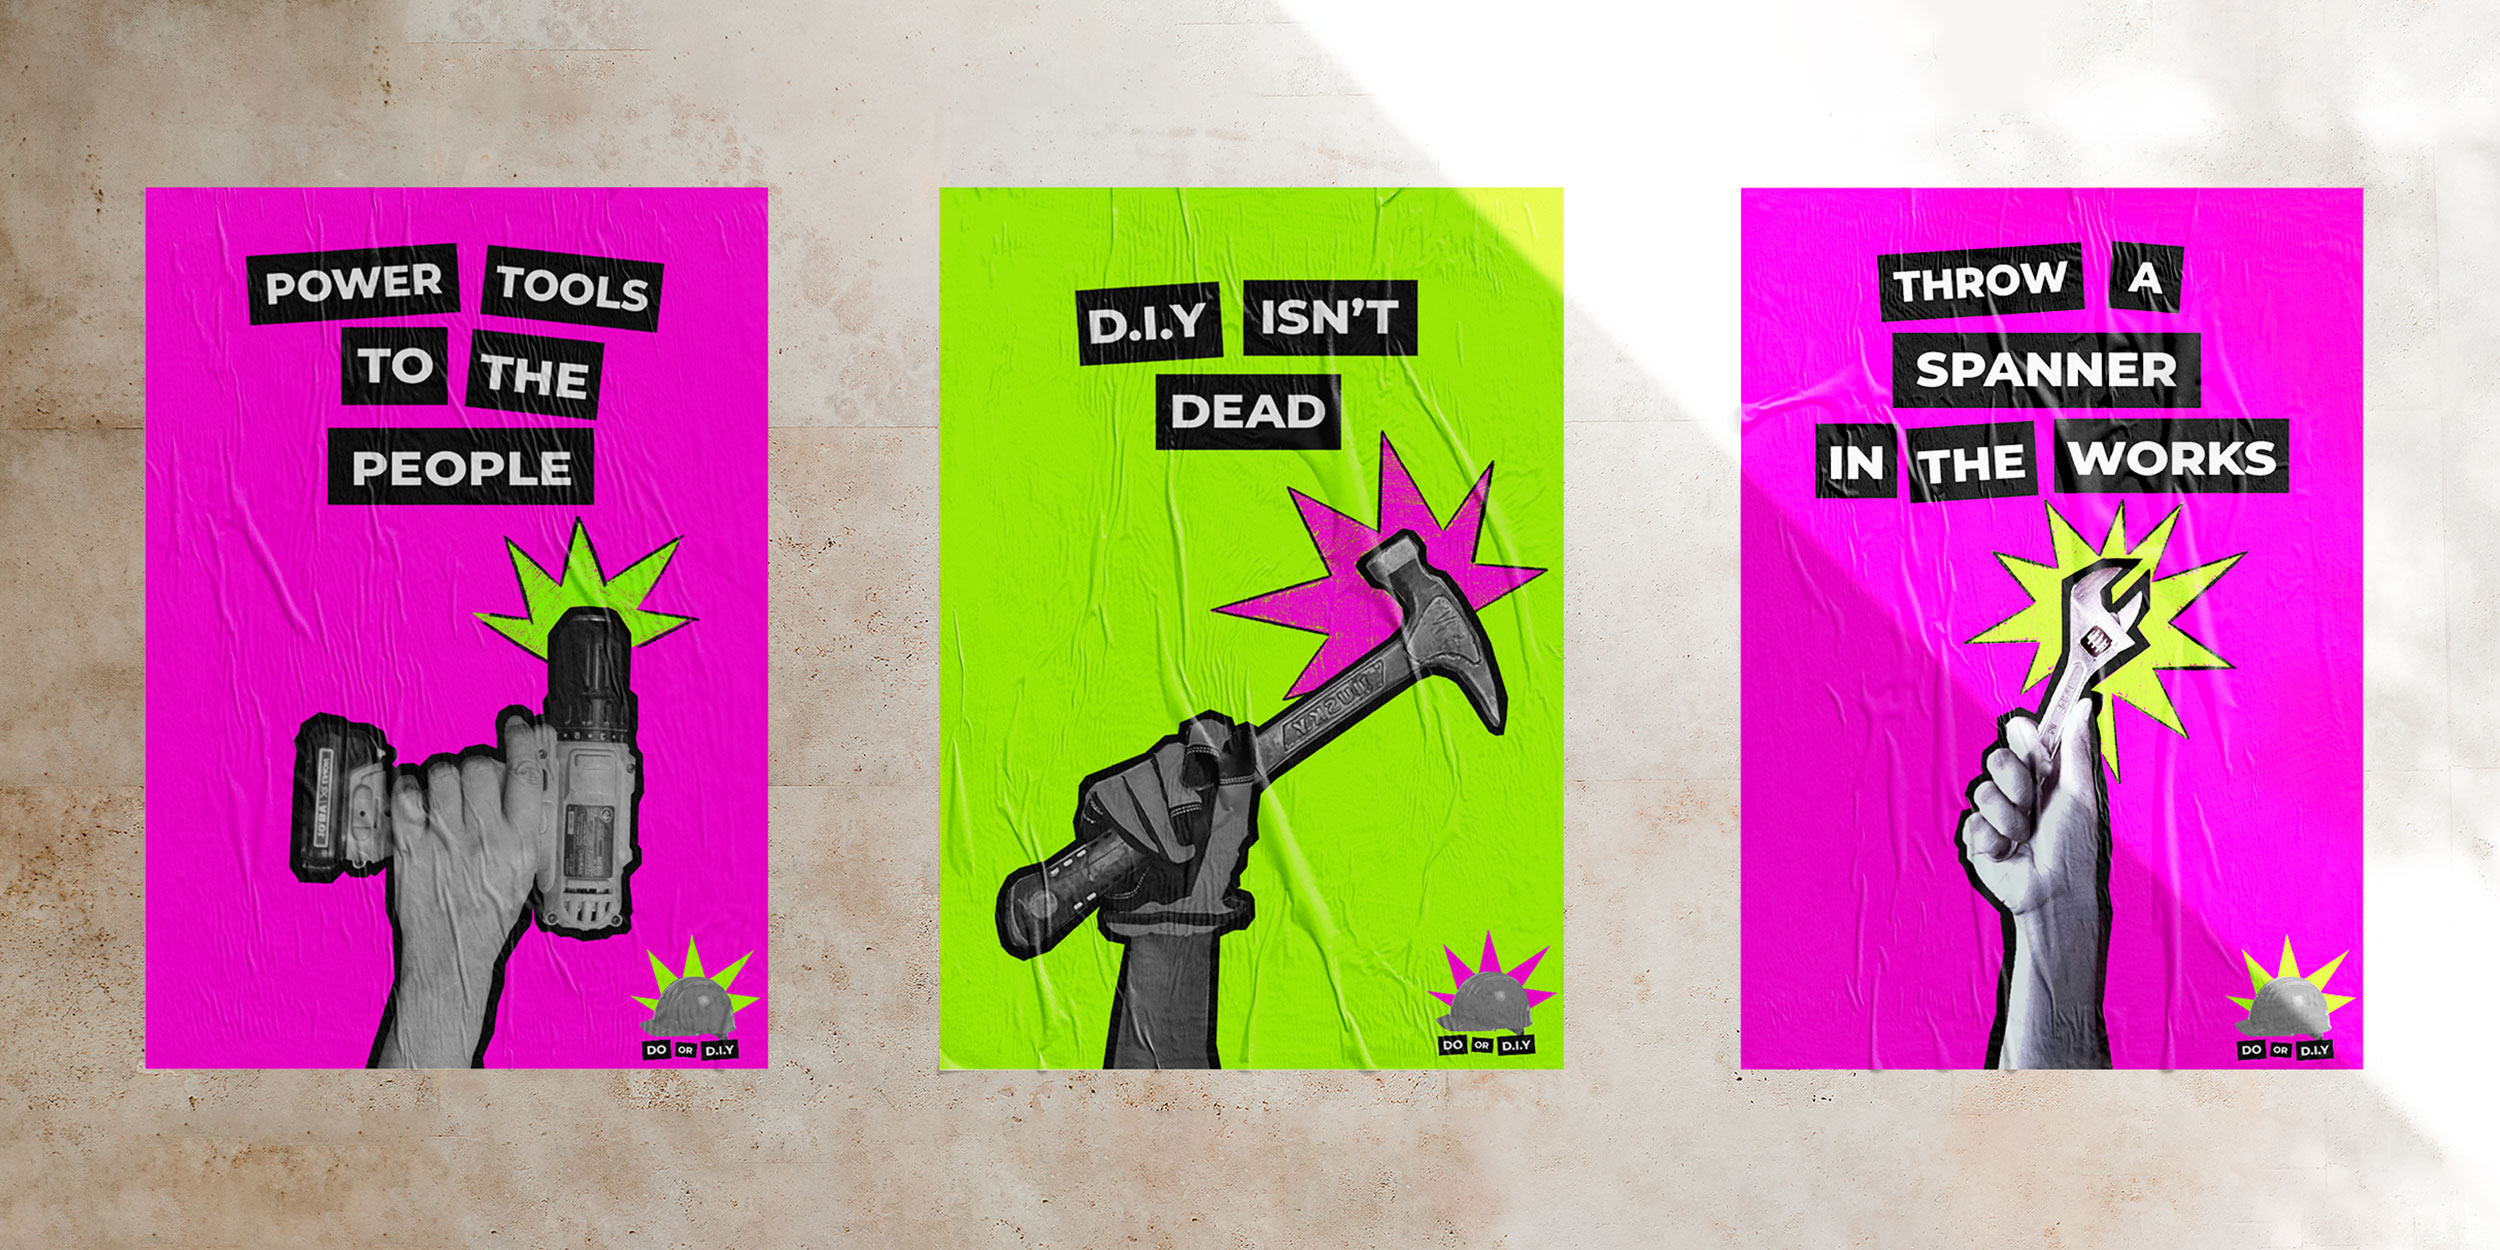 A set of 3 brightly coloured posters, featuring collaged Hardware tools and punk slogans.